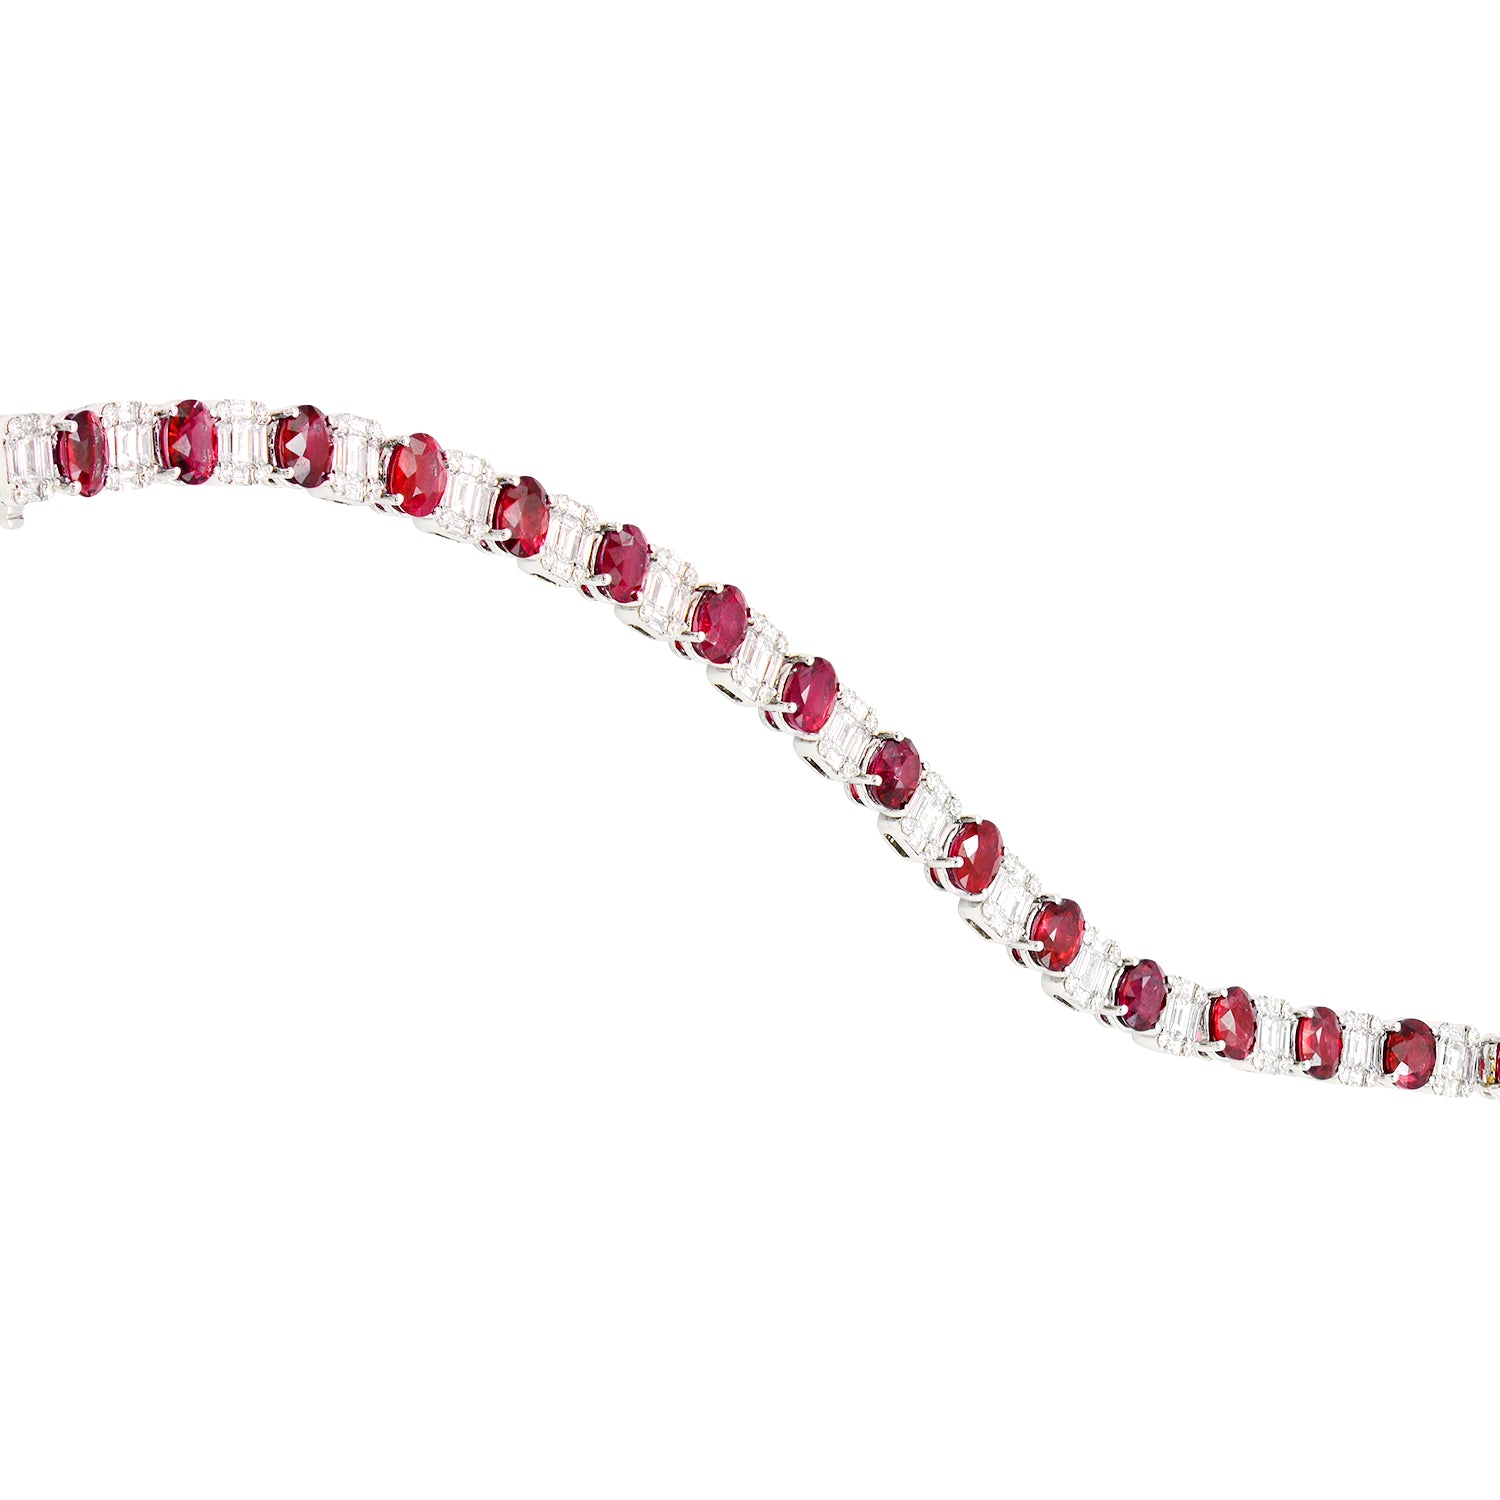 Necklace 18KW/32.3G 49EMER-15.24CT 245BD-5.75CT 196RD-1.24CT